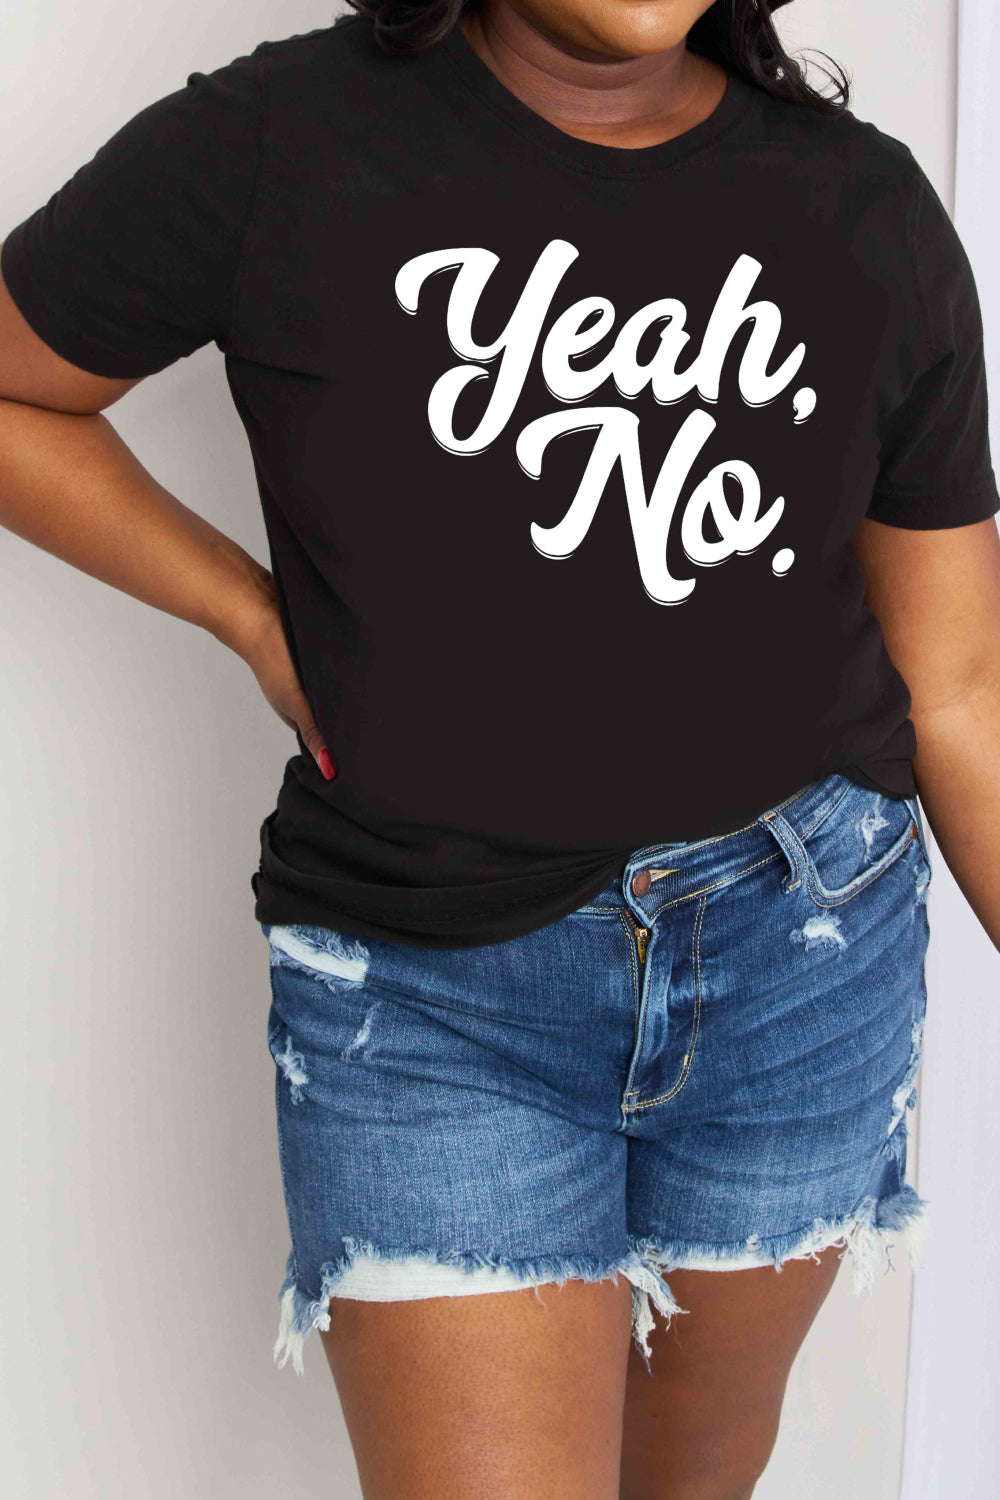 YEAH, NO Funny Graphic 100% Cotton Short-sleeve Tee Shirt (Plus Size Available)